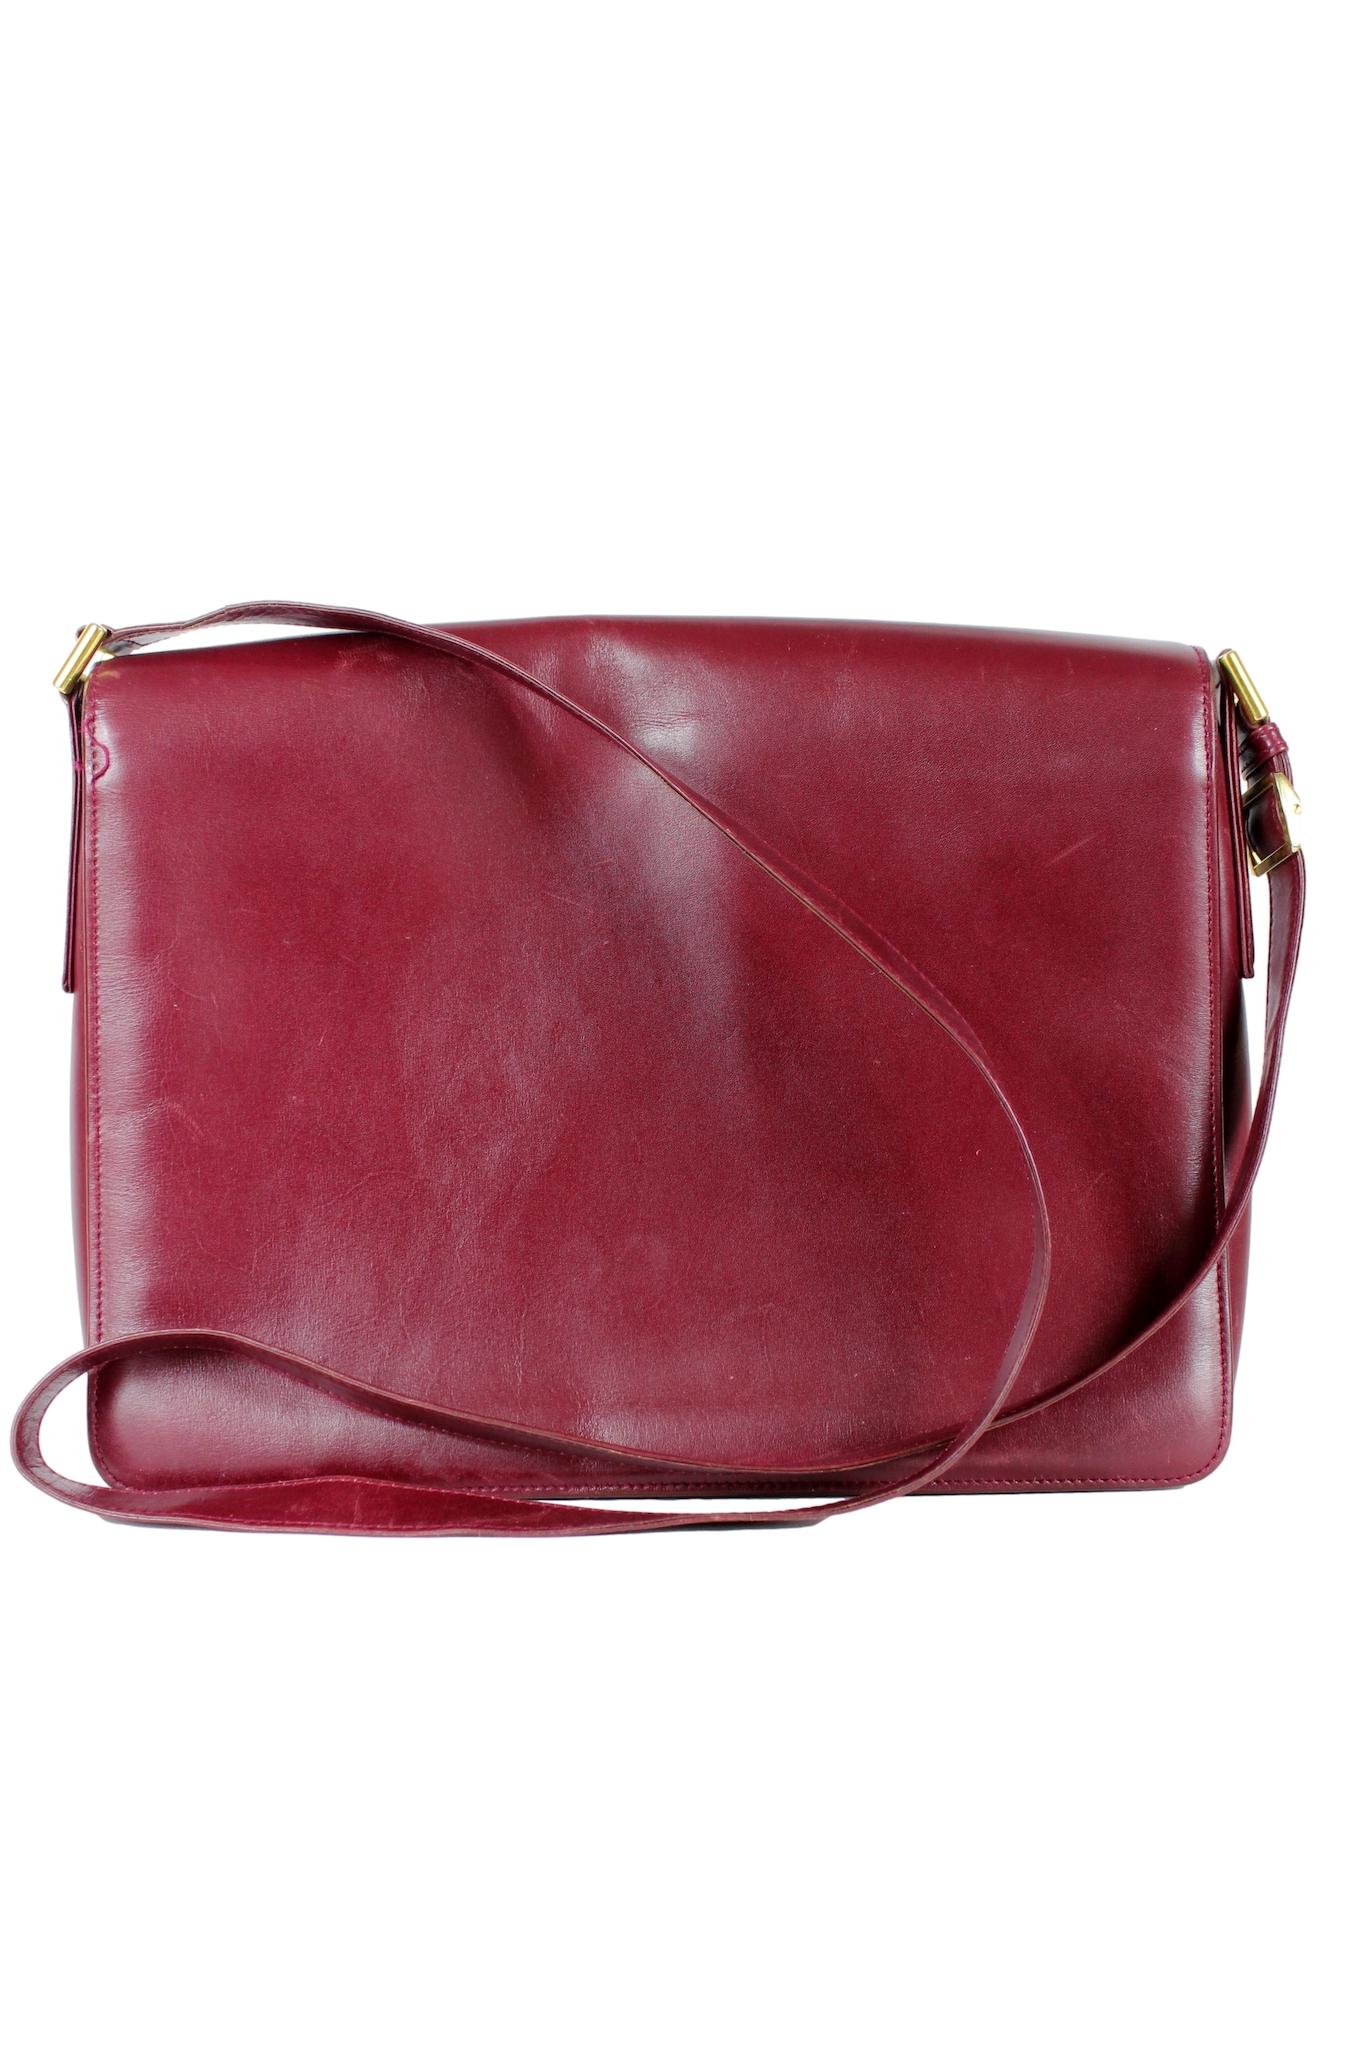 This stunning Gucci messenger bag is the perfect blend of vintage elegance and modern functionality. The burgundy color gives it a timeless look that will never go out of style. From the 1980s, this bag features a velvet lining and three inside